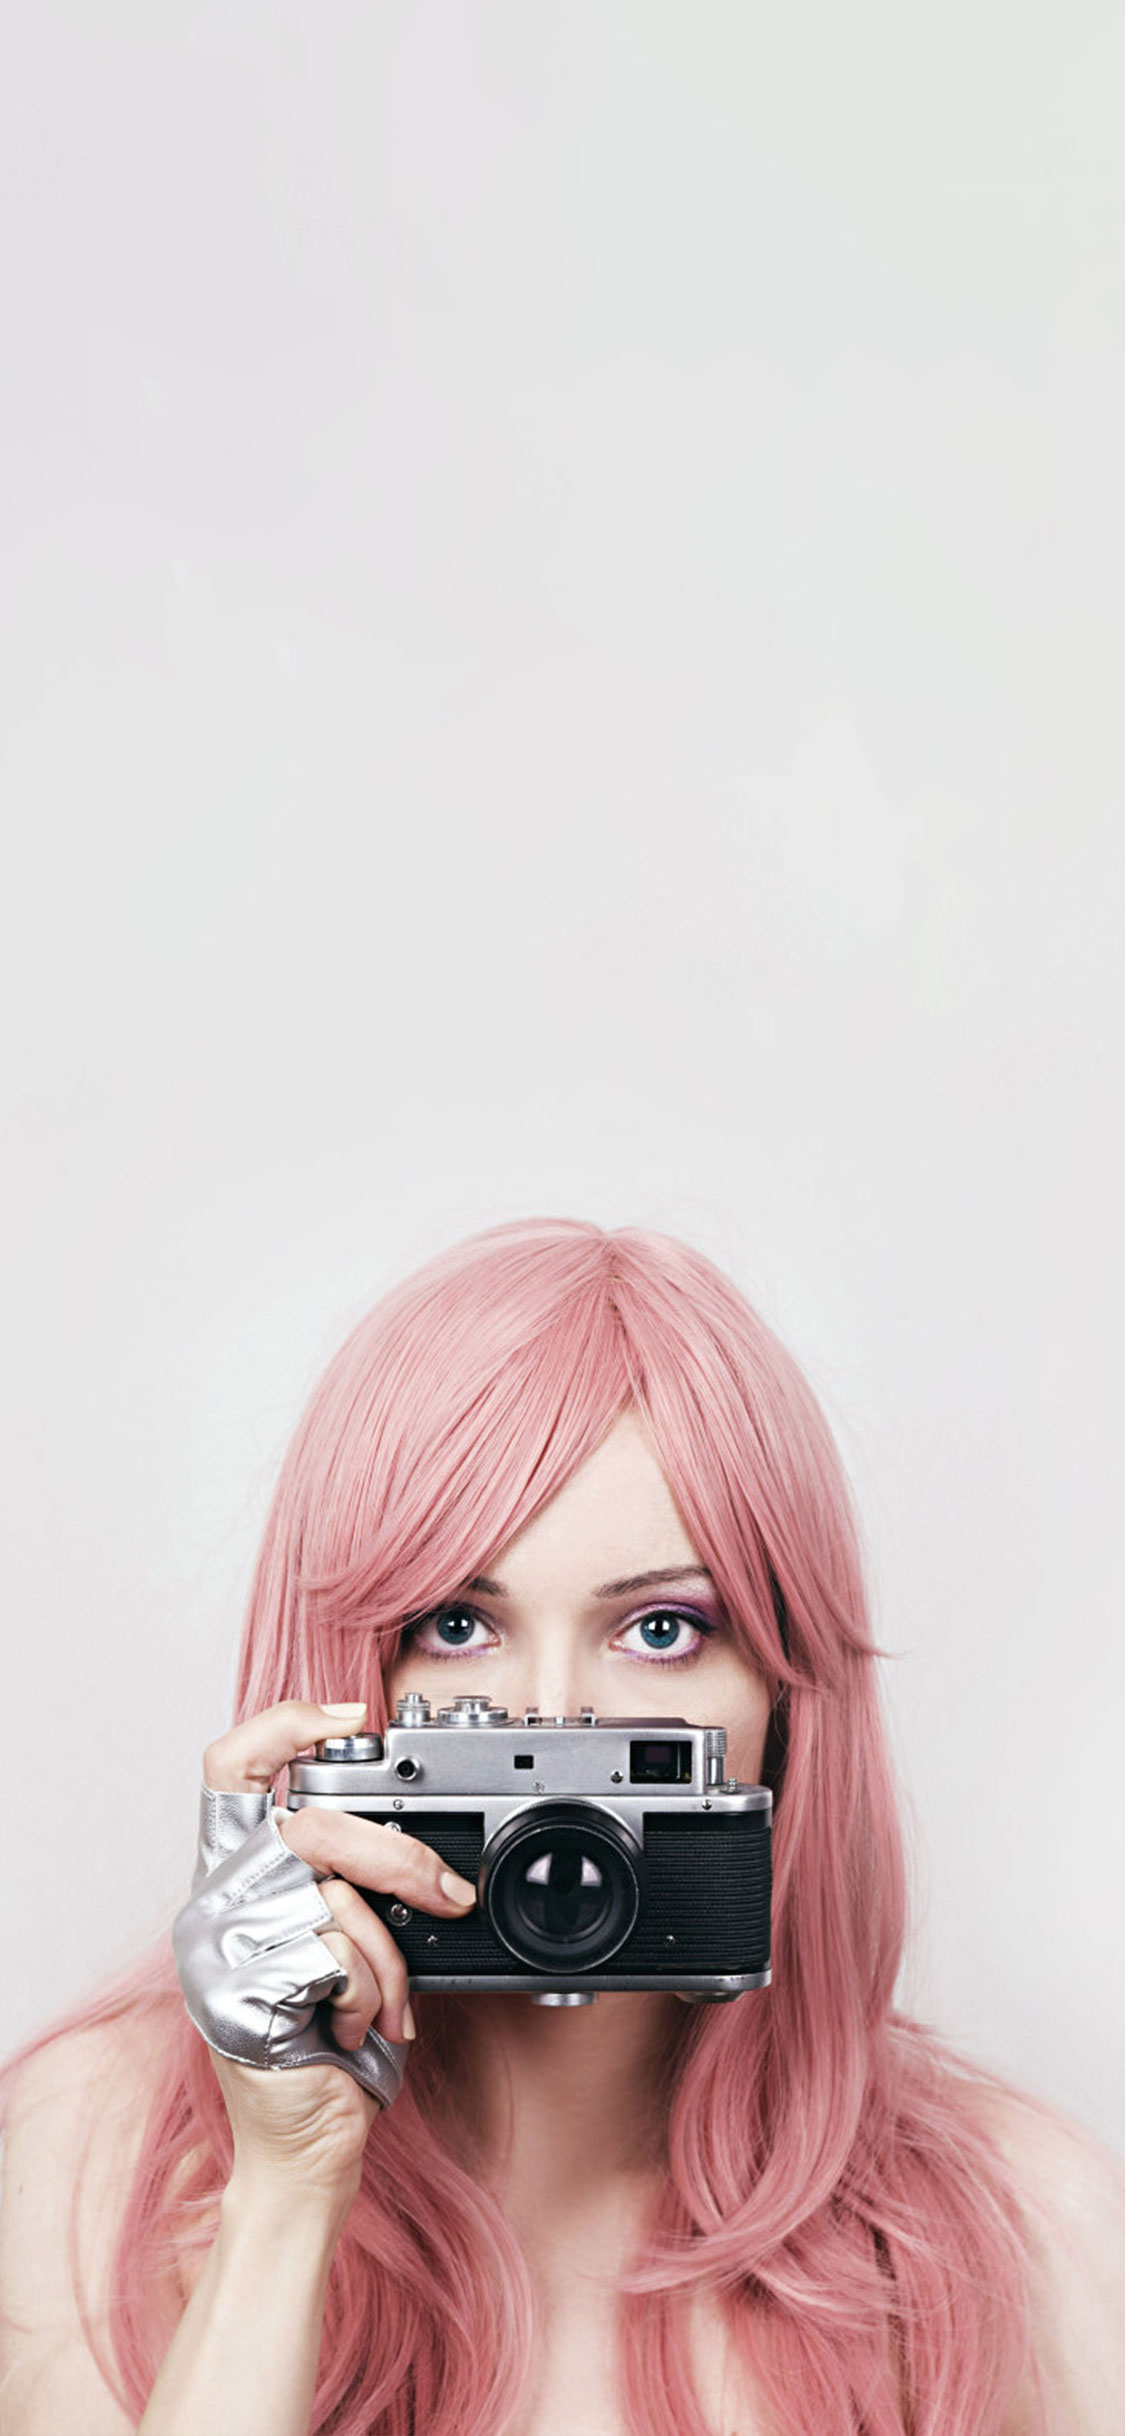 cute wallpapers for girls,hair,pink,photograph,blond,photography